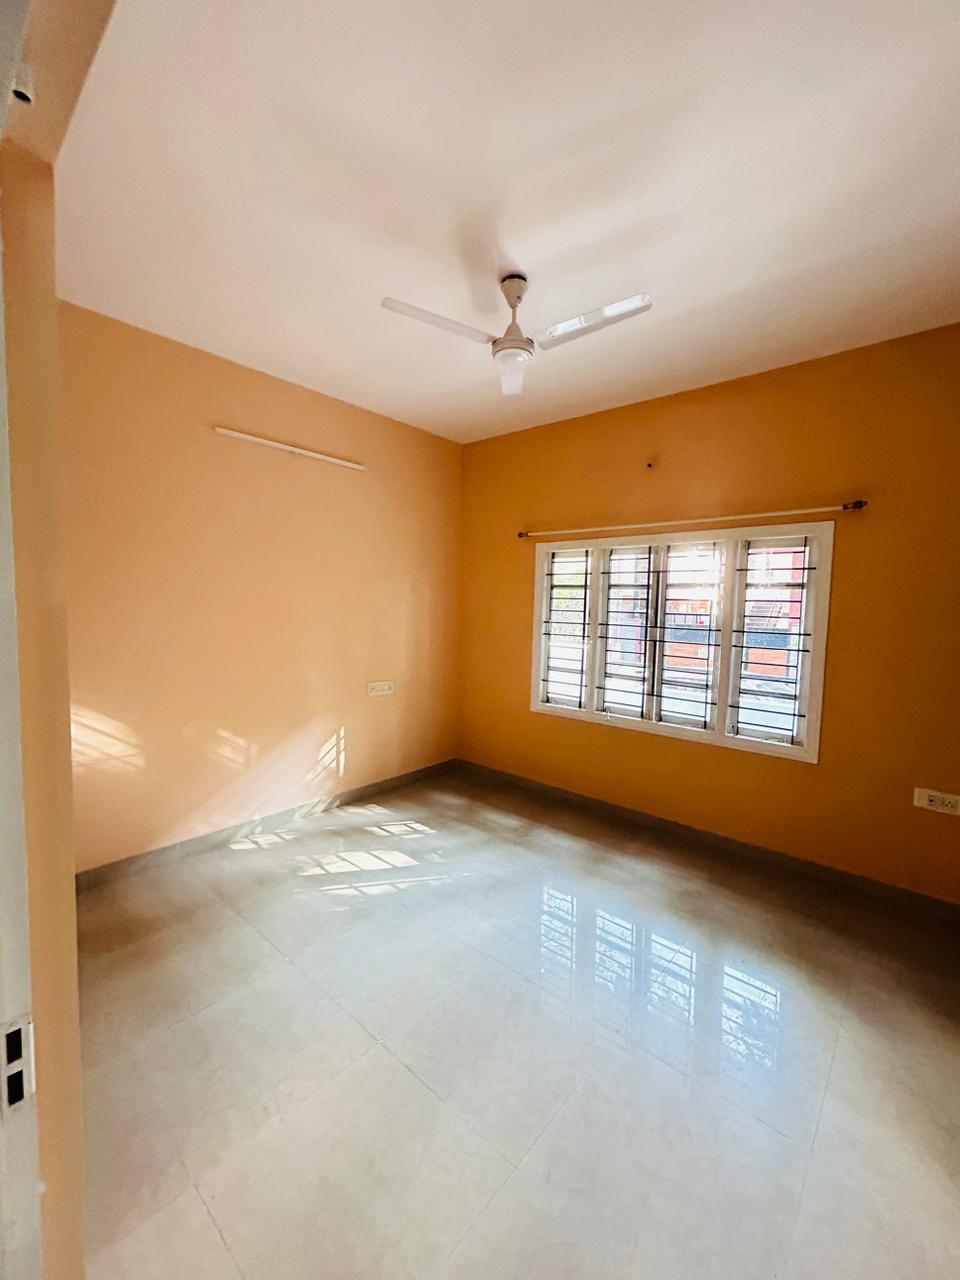 2 BHK Independent House for Lease Only at JAML2 - 4509 in Lingarajapuram